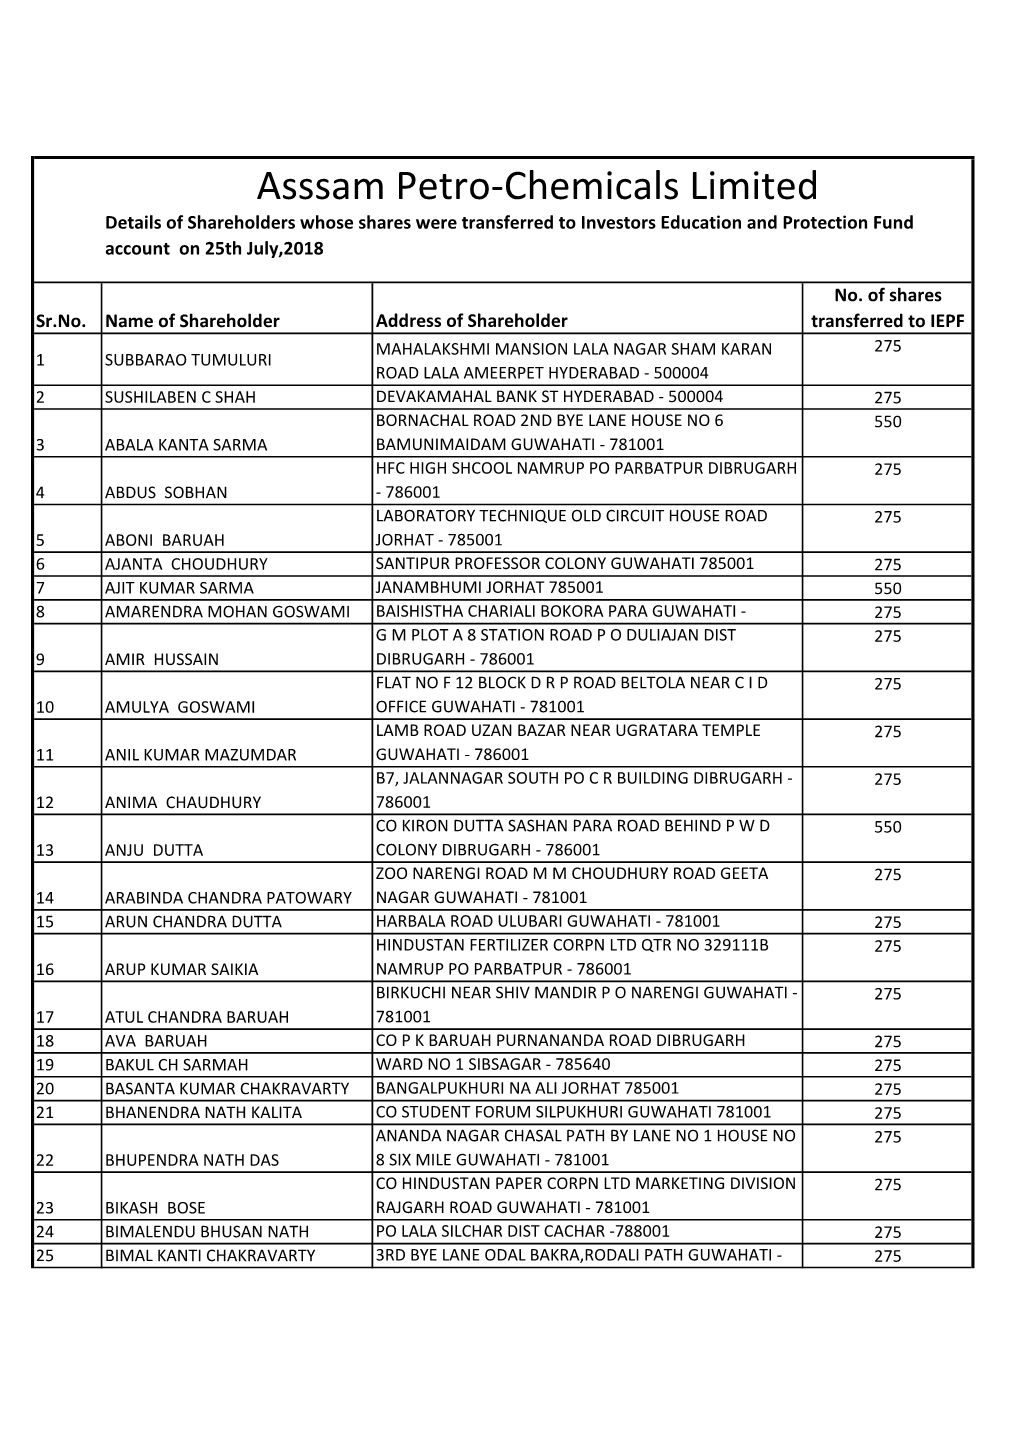 Asssam Petro-Chemicals Limited Details of Shareholders Whose Shares Were Transferred to Investors Education and Protection Fund Account on 25Th July,2018